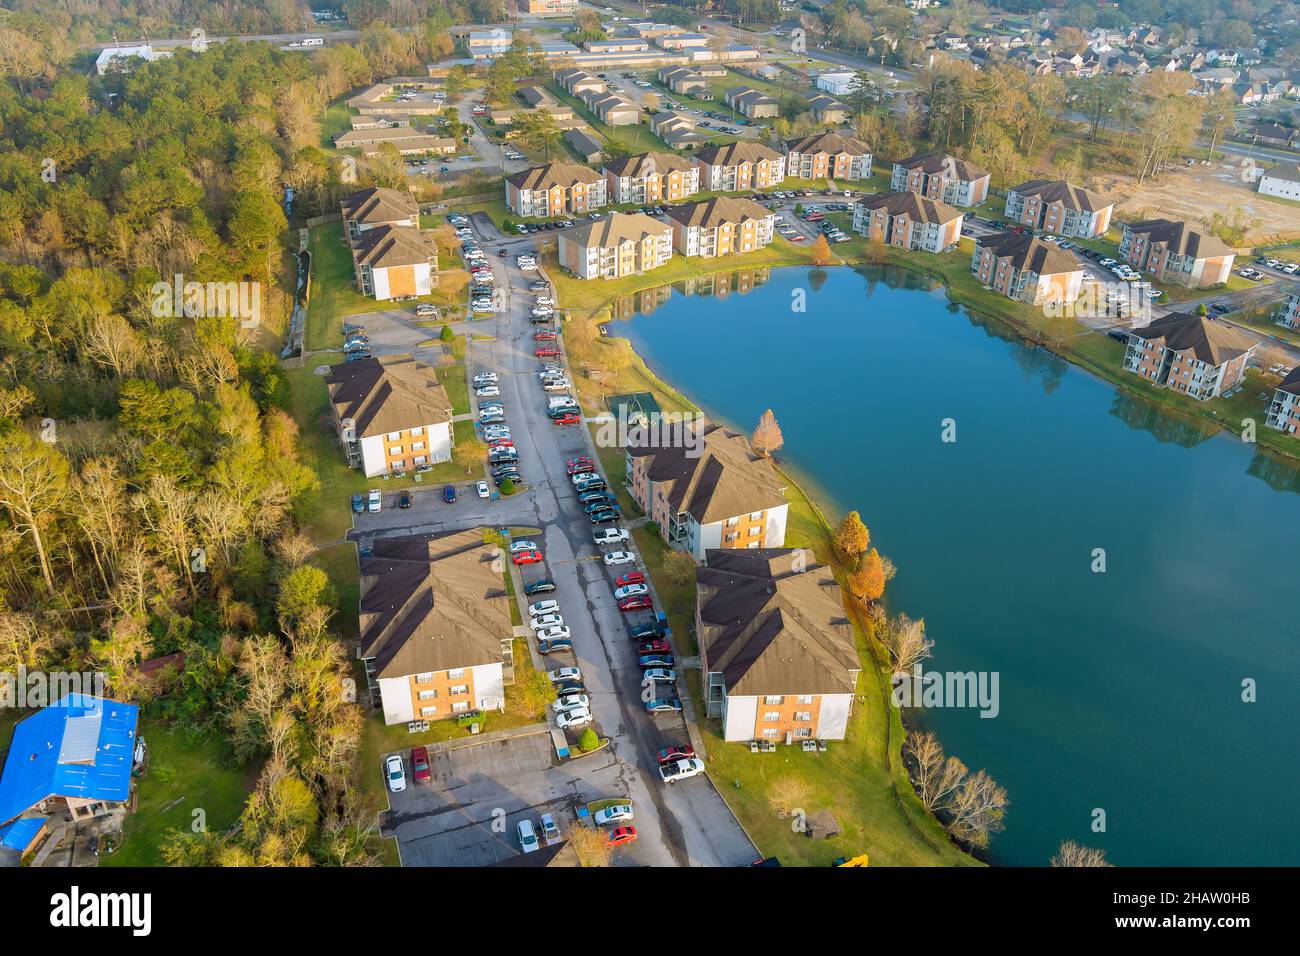 Autumn season residential street, apartment complex near pond from above American small town in Denham Springs Louisiana Stock Photo